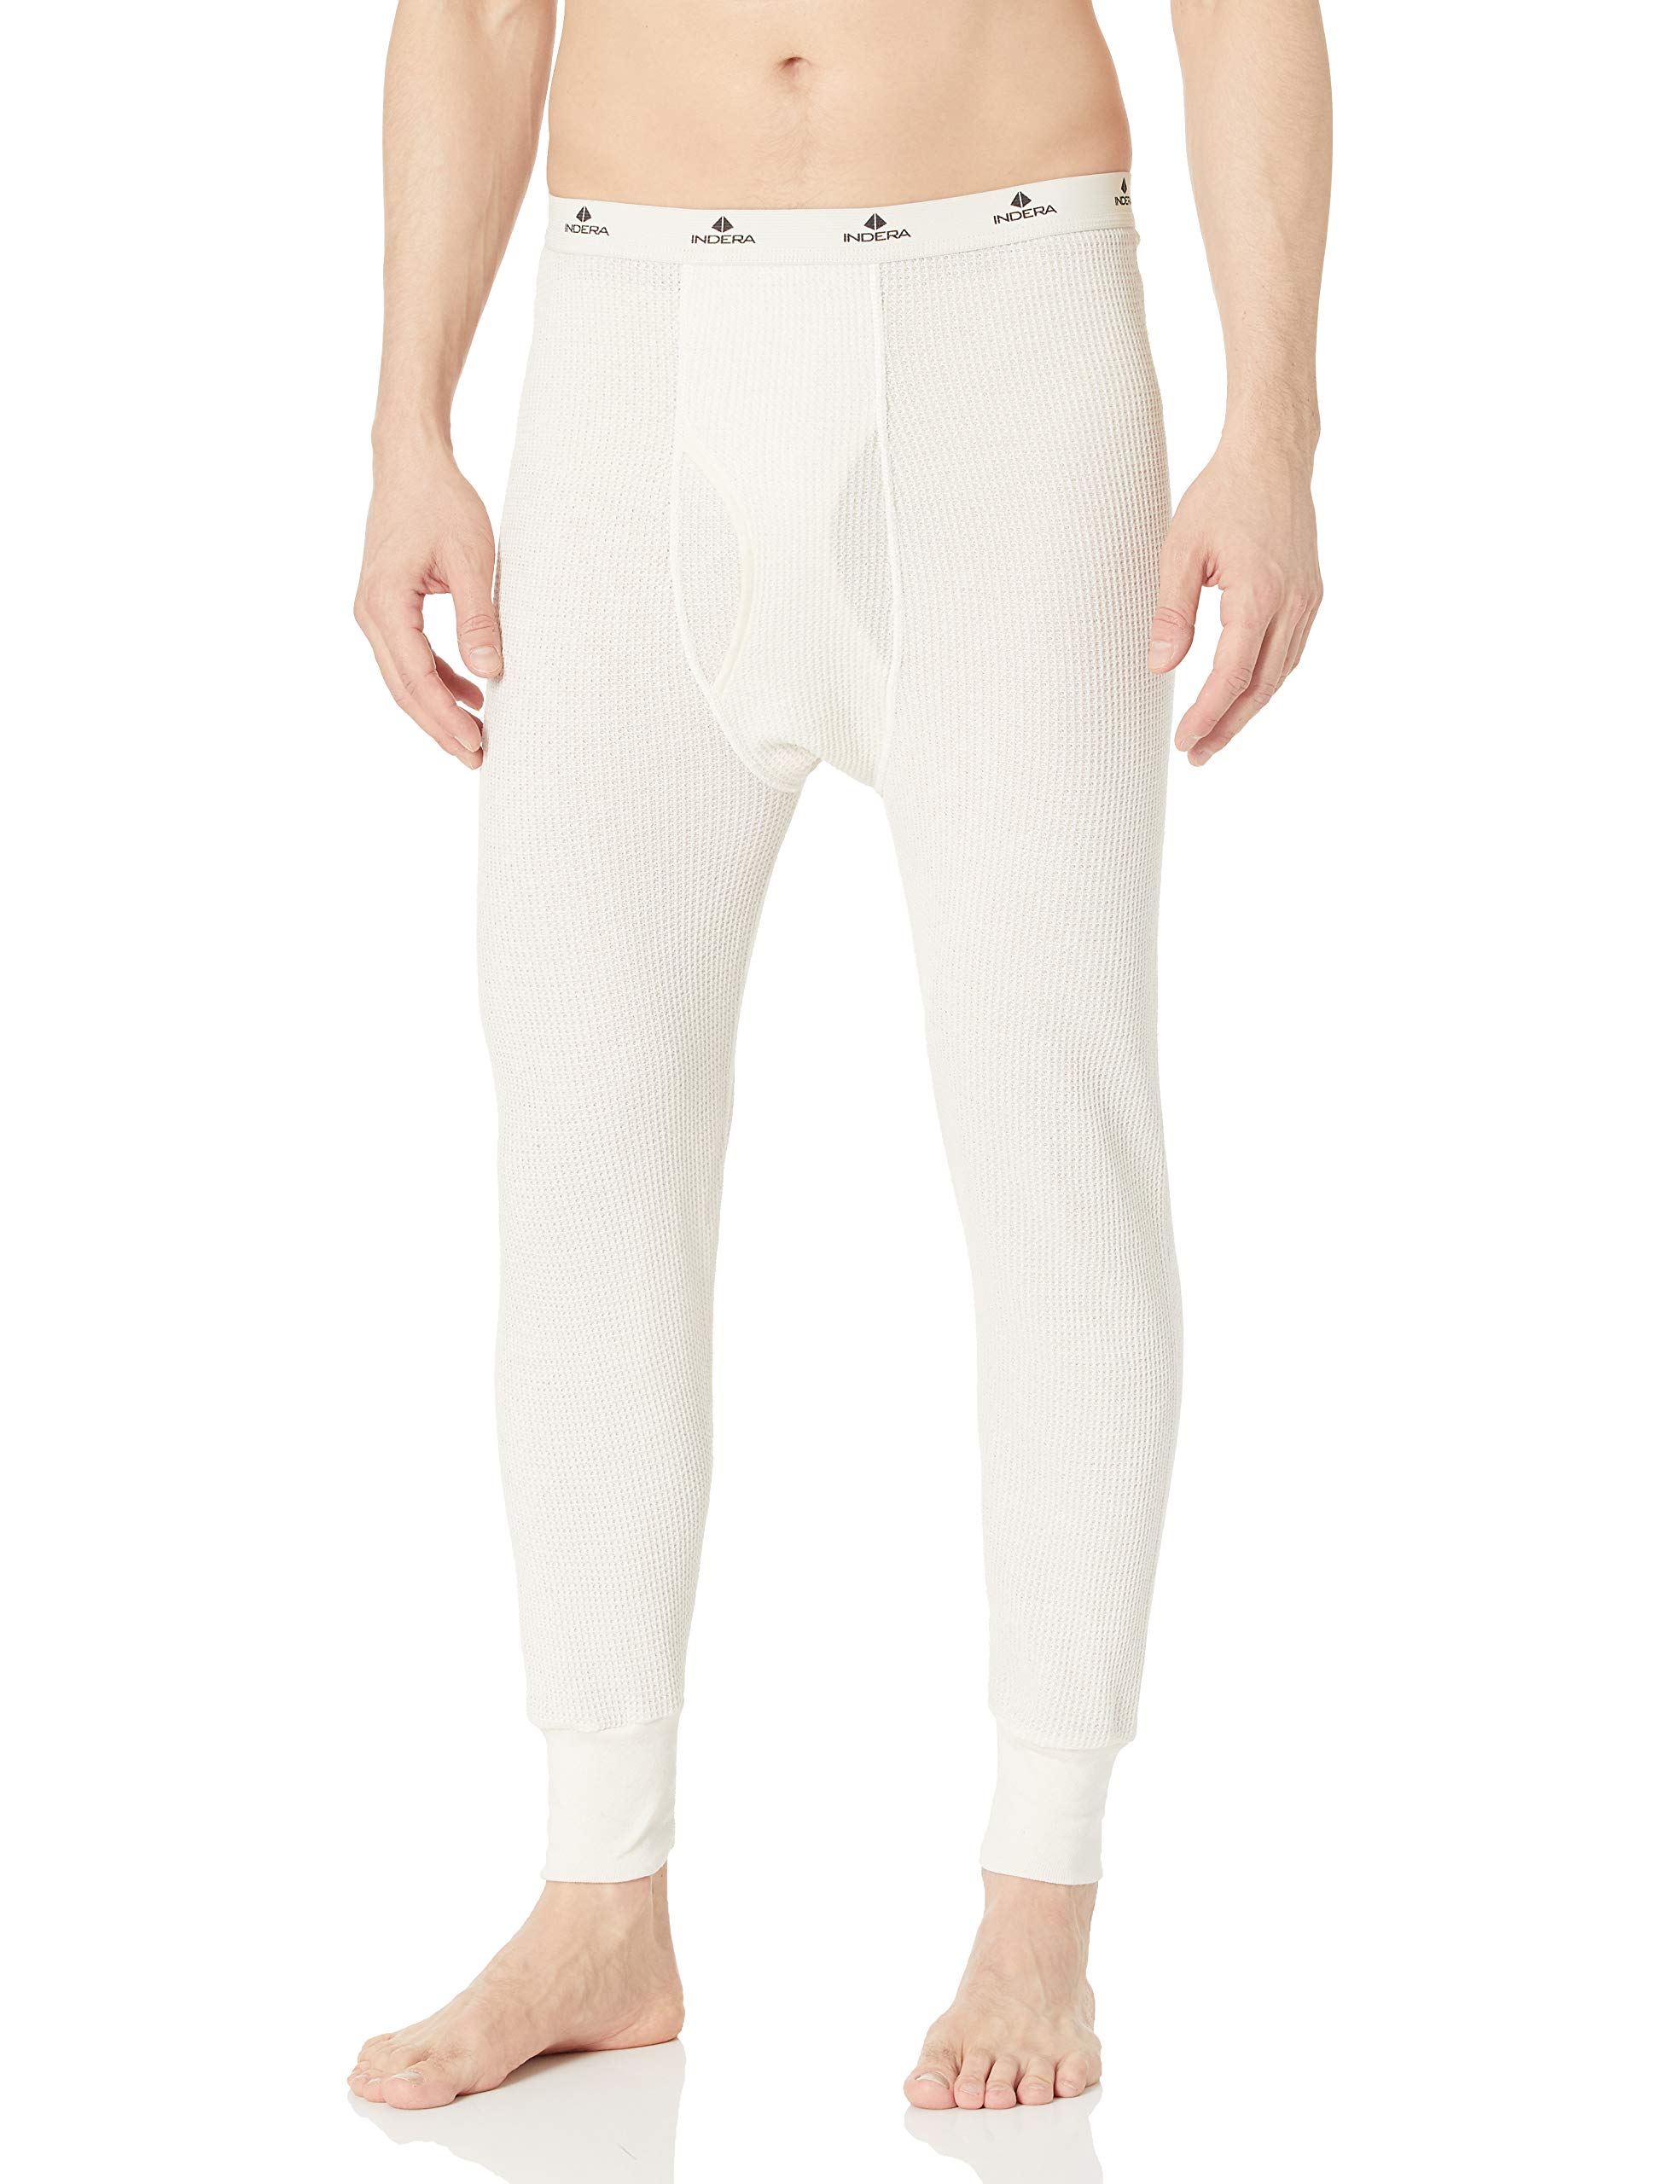 Indera Traditional Long Johns Thermal Underwear For Men